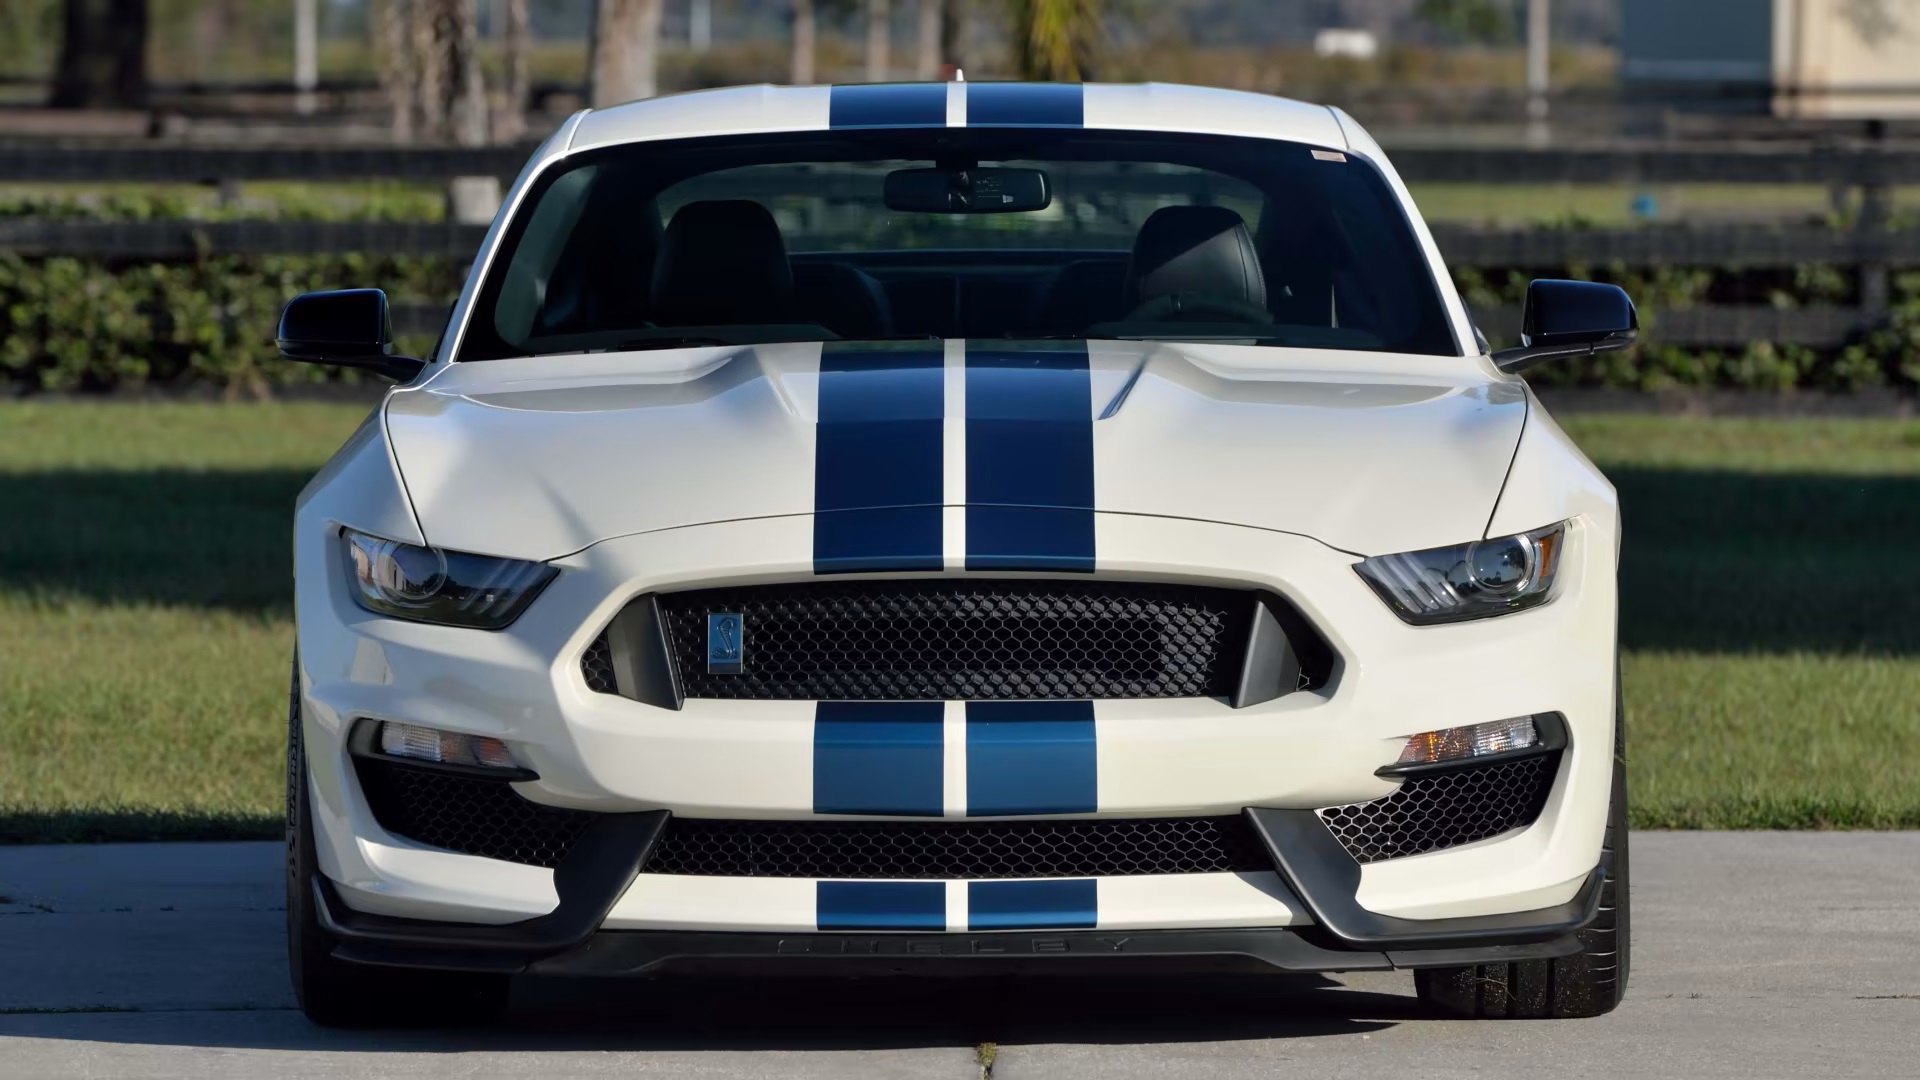  2020 Ford Mustang Shelby GT350 Heritage Edition